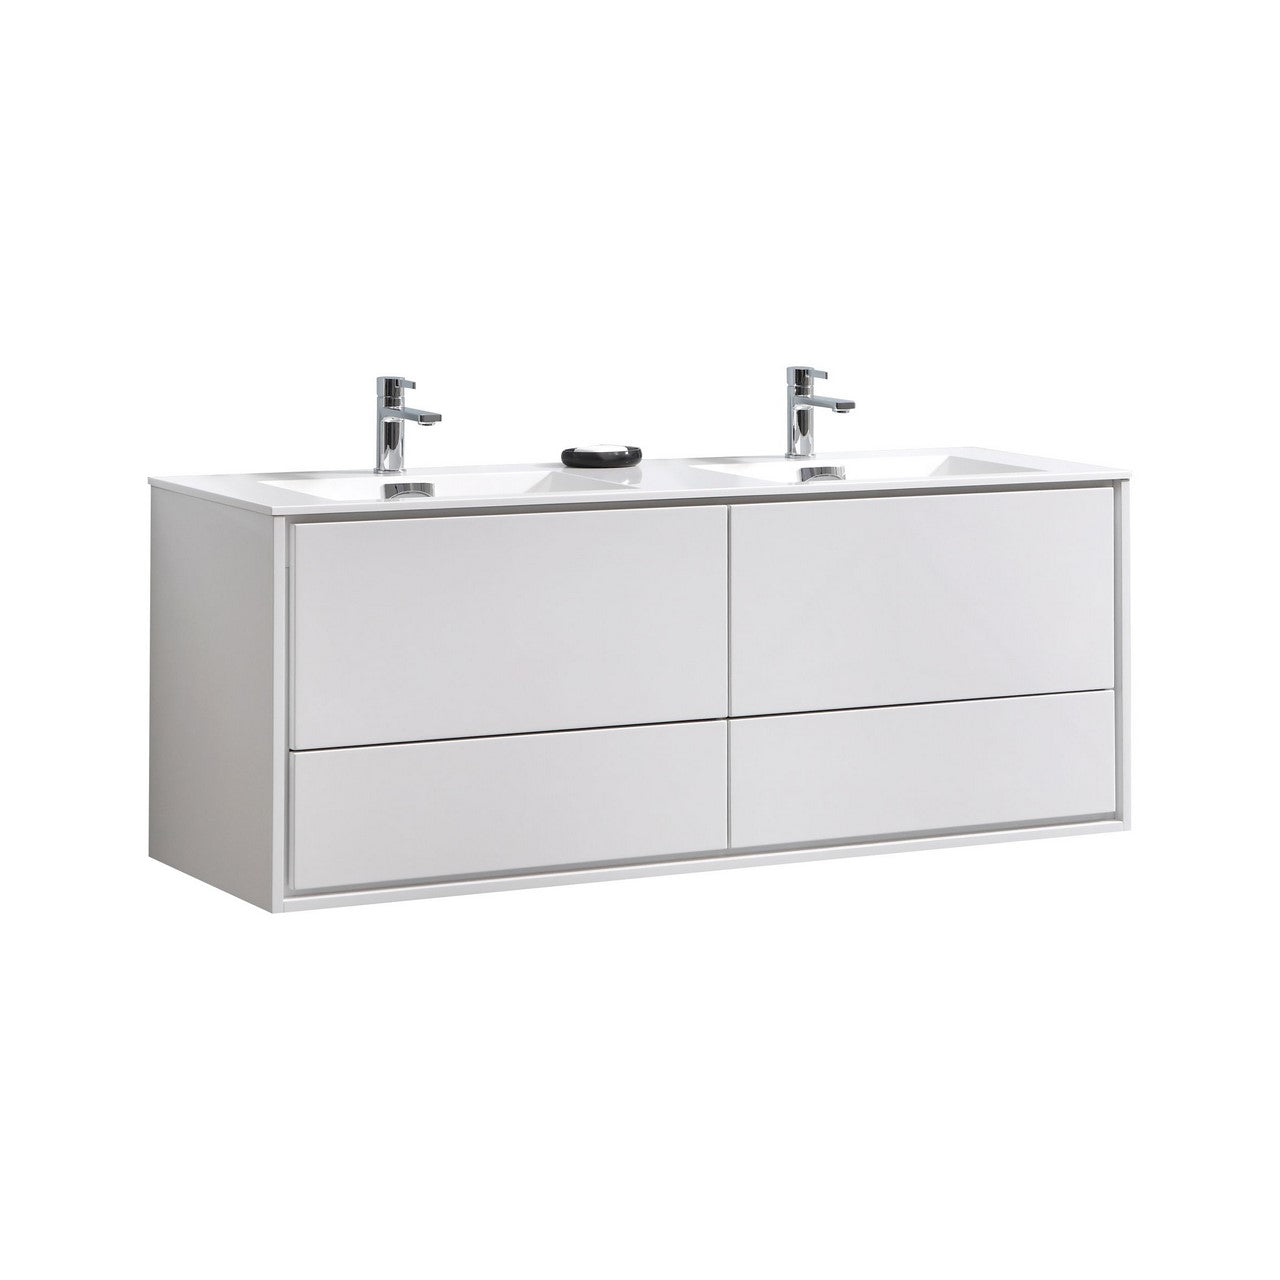 KUBEBATH De Lusso DL60D-GW 60" Double Wall Mount Bathroom Vanity in High Gloss White with White Acrylic Composite, Integrated Sinks, Angled View